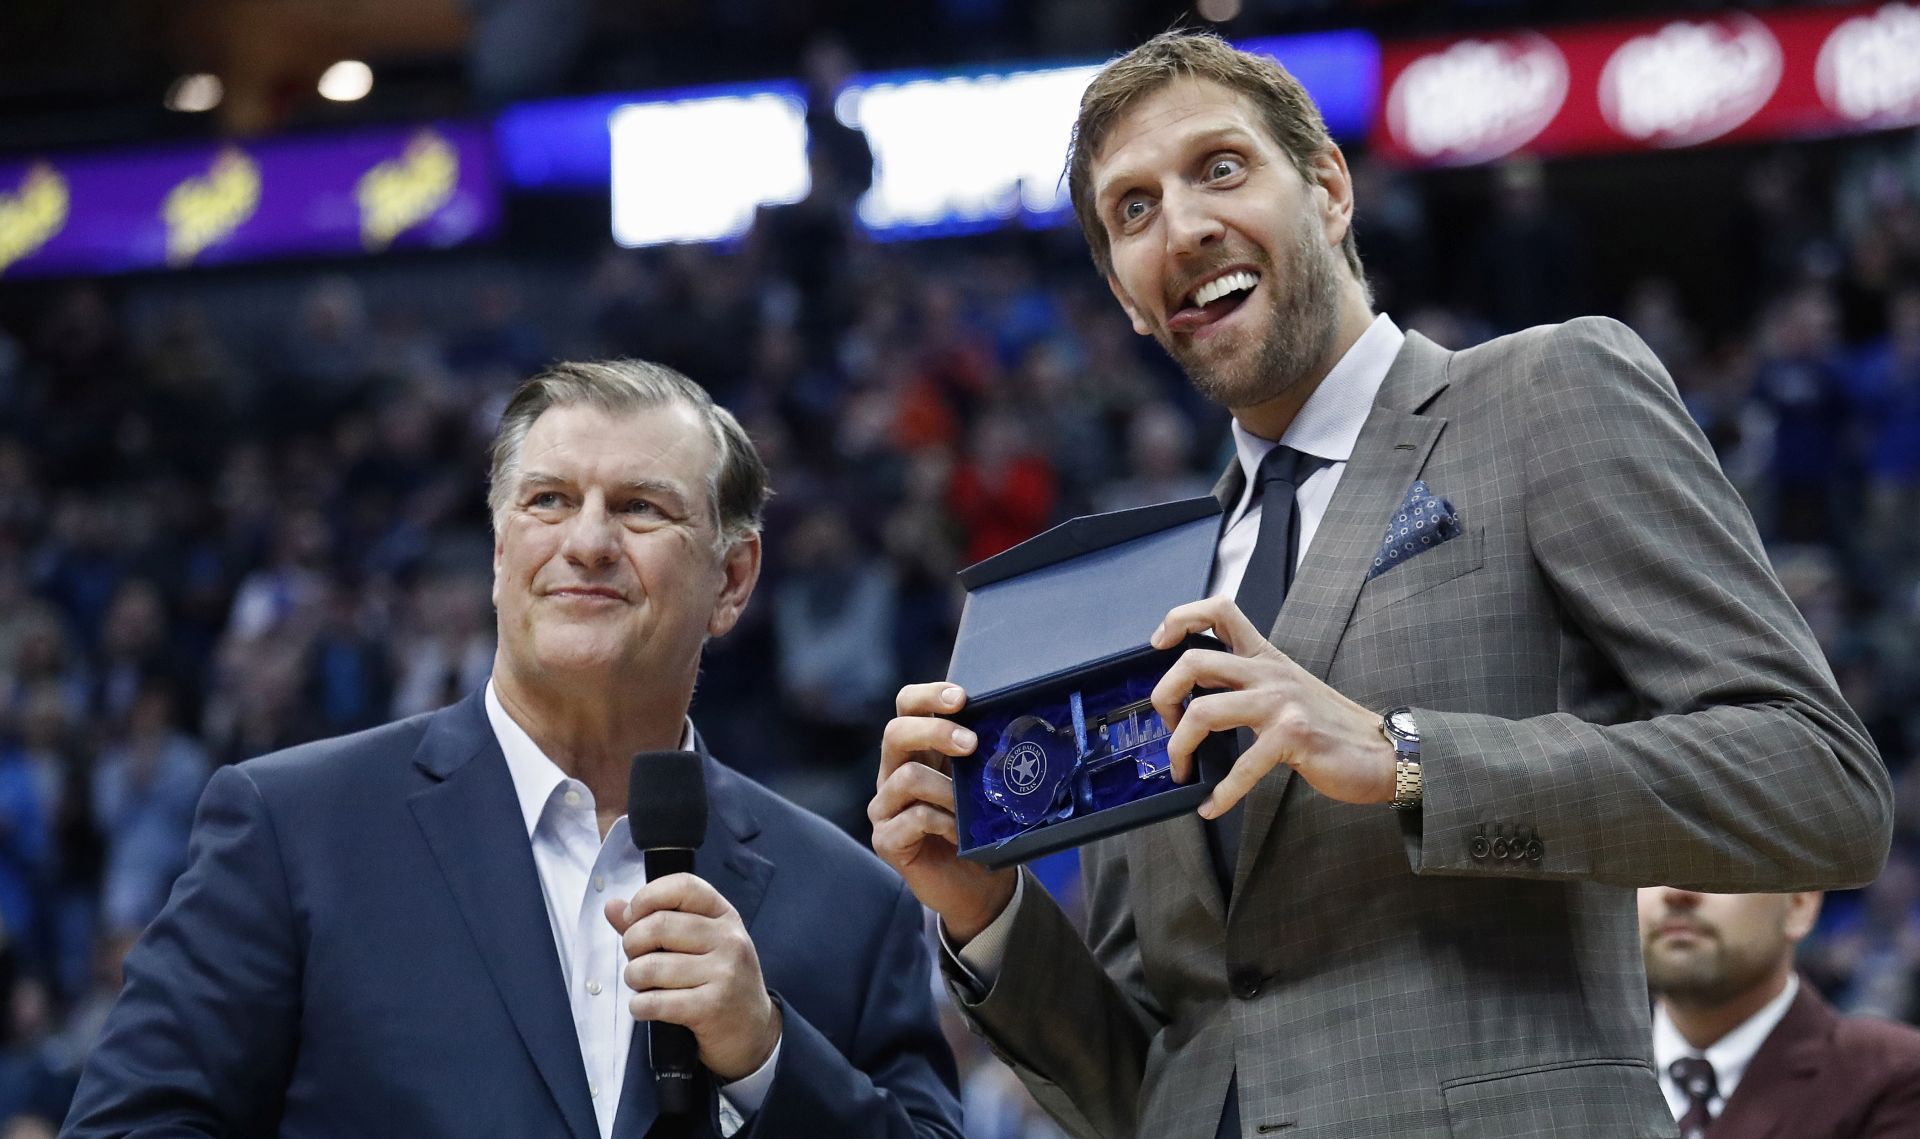 epa07182187 Dallas Mavericks player Dirk Nowitzki (R) of Germany accepts the key to the city from Dallas Mayor Mike Rawlings (L) at halftime in the game against the Brooklyn Nets during their NBA basketball game at the American Airlines Center in Dallas, Texas, USA, 21 November 2018.  EPA/LARRY W. SMITH  SHUTTERSTOCK OUT